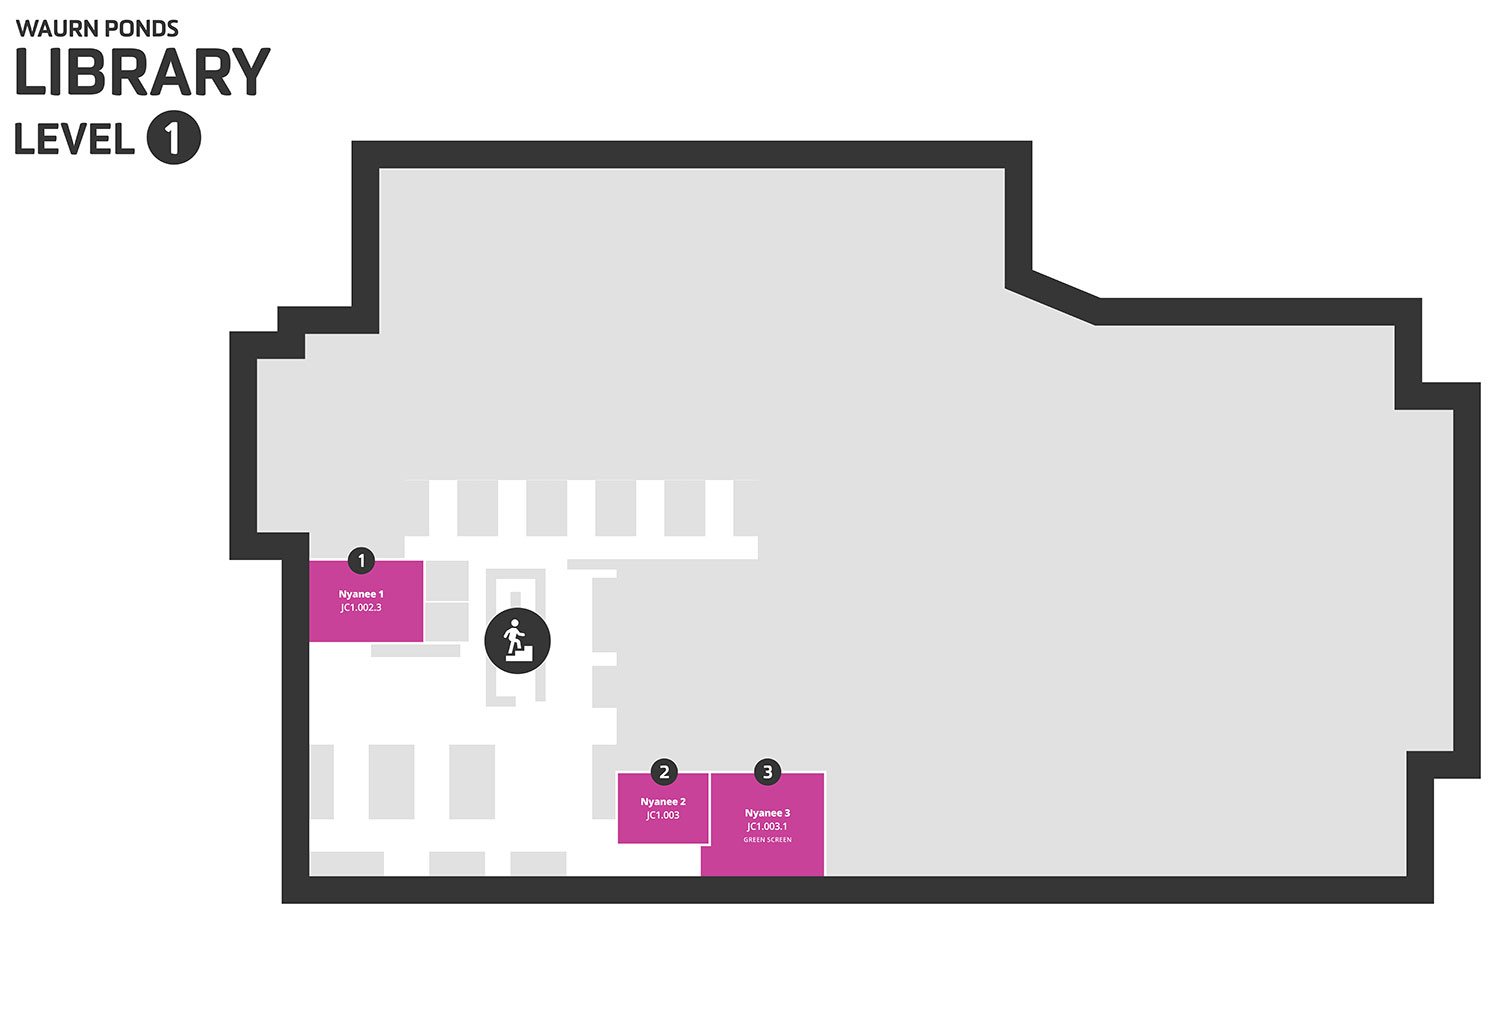 floor plan image of Waurn Ponds campus library level 1